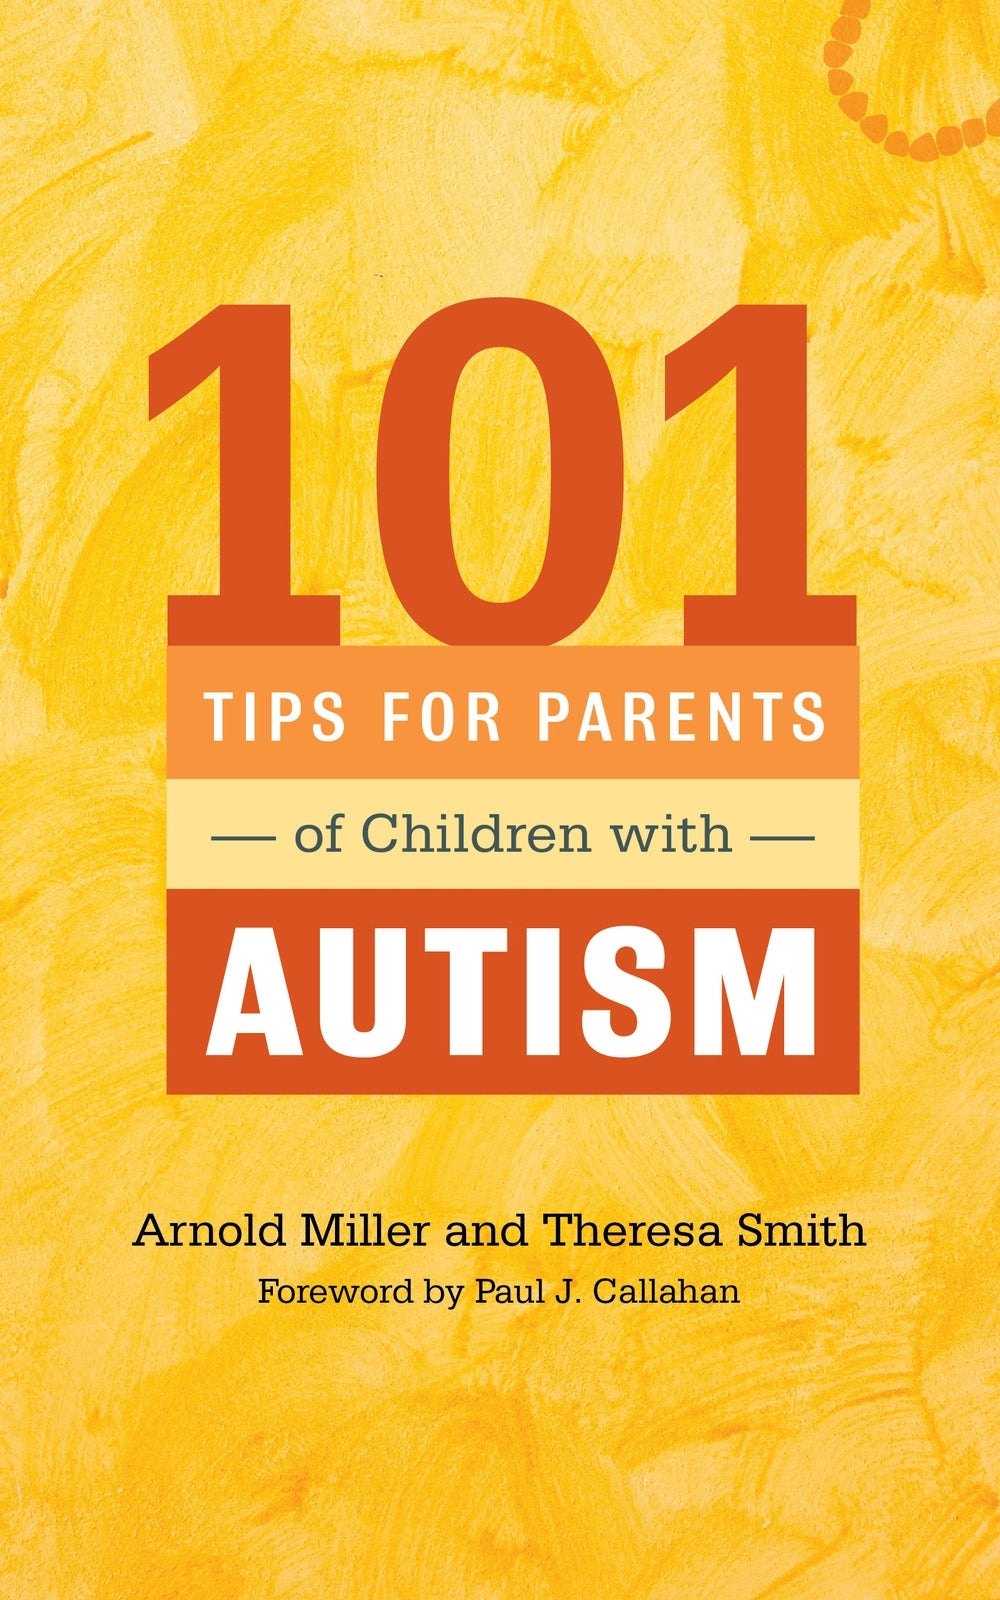 101 Tips for Parents of Children with Autism by Paul J. Callahan, Theresa Smith, Arnold Miller, Ethan B. Miller